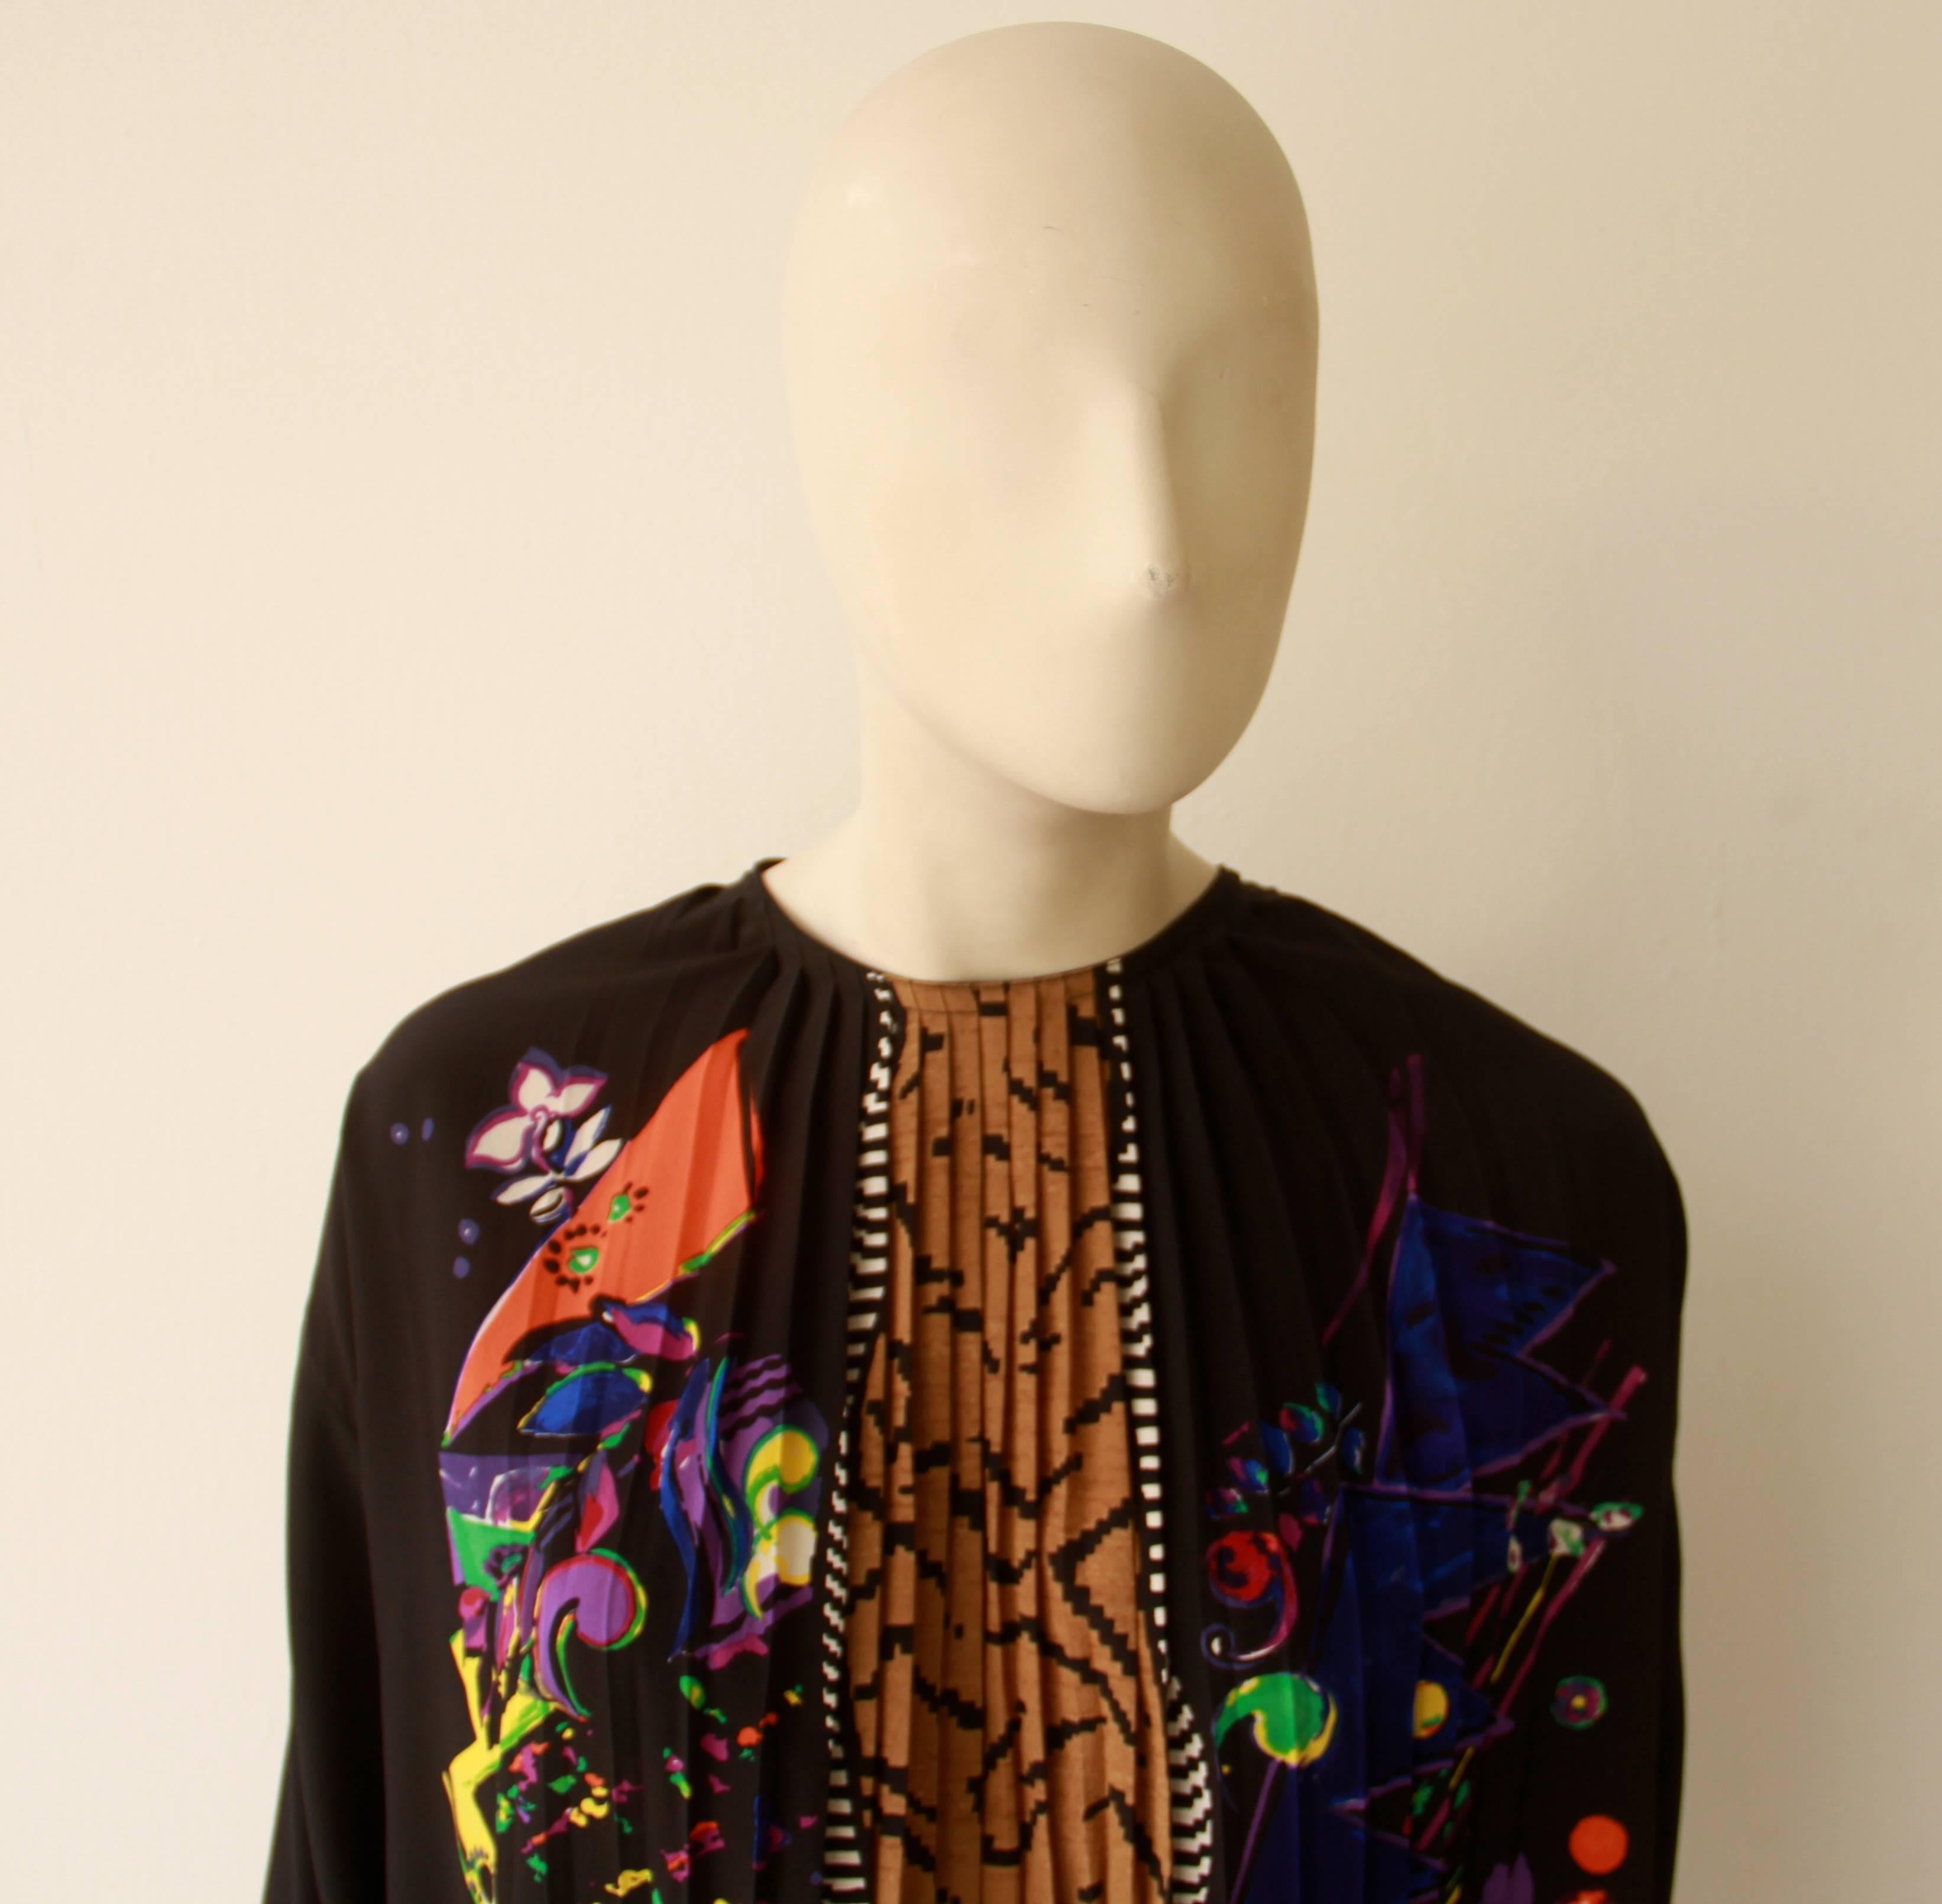 Very rare Gianni Versace silk plisse printed shirt from the Fall 1989 collection.

Marked an Italian size 40.

Manufacturer - Alias S.p.a.

Fabric content - 100% silk